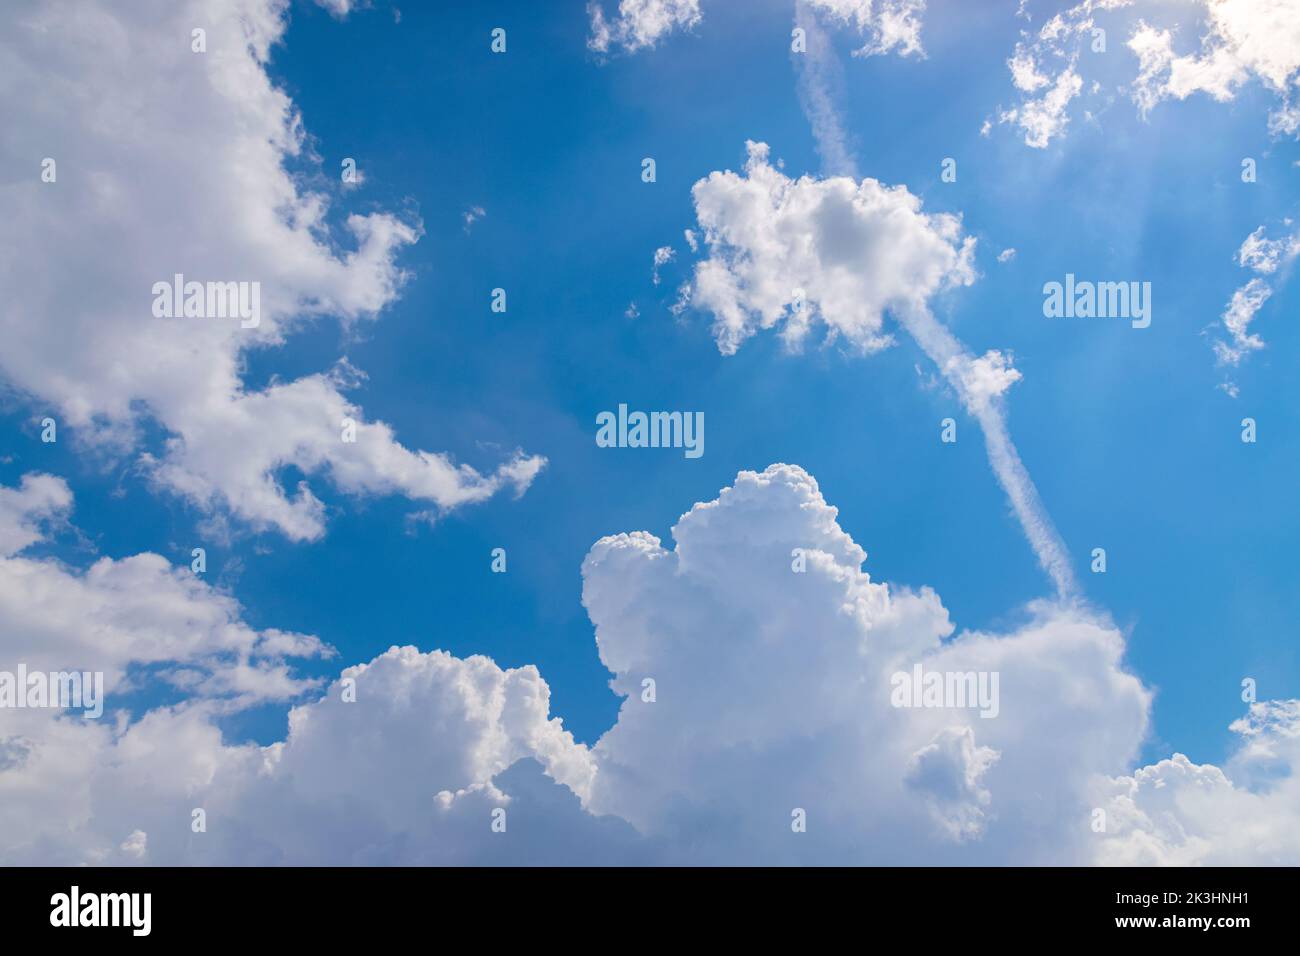 Engine exhaust contrails in the blue cloudy sky. Stock Photo